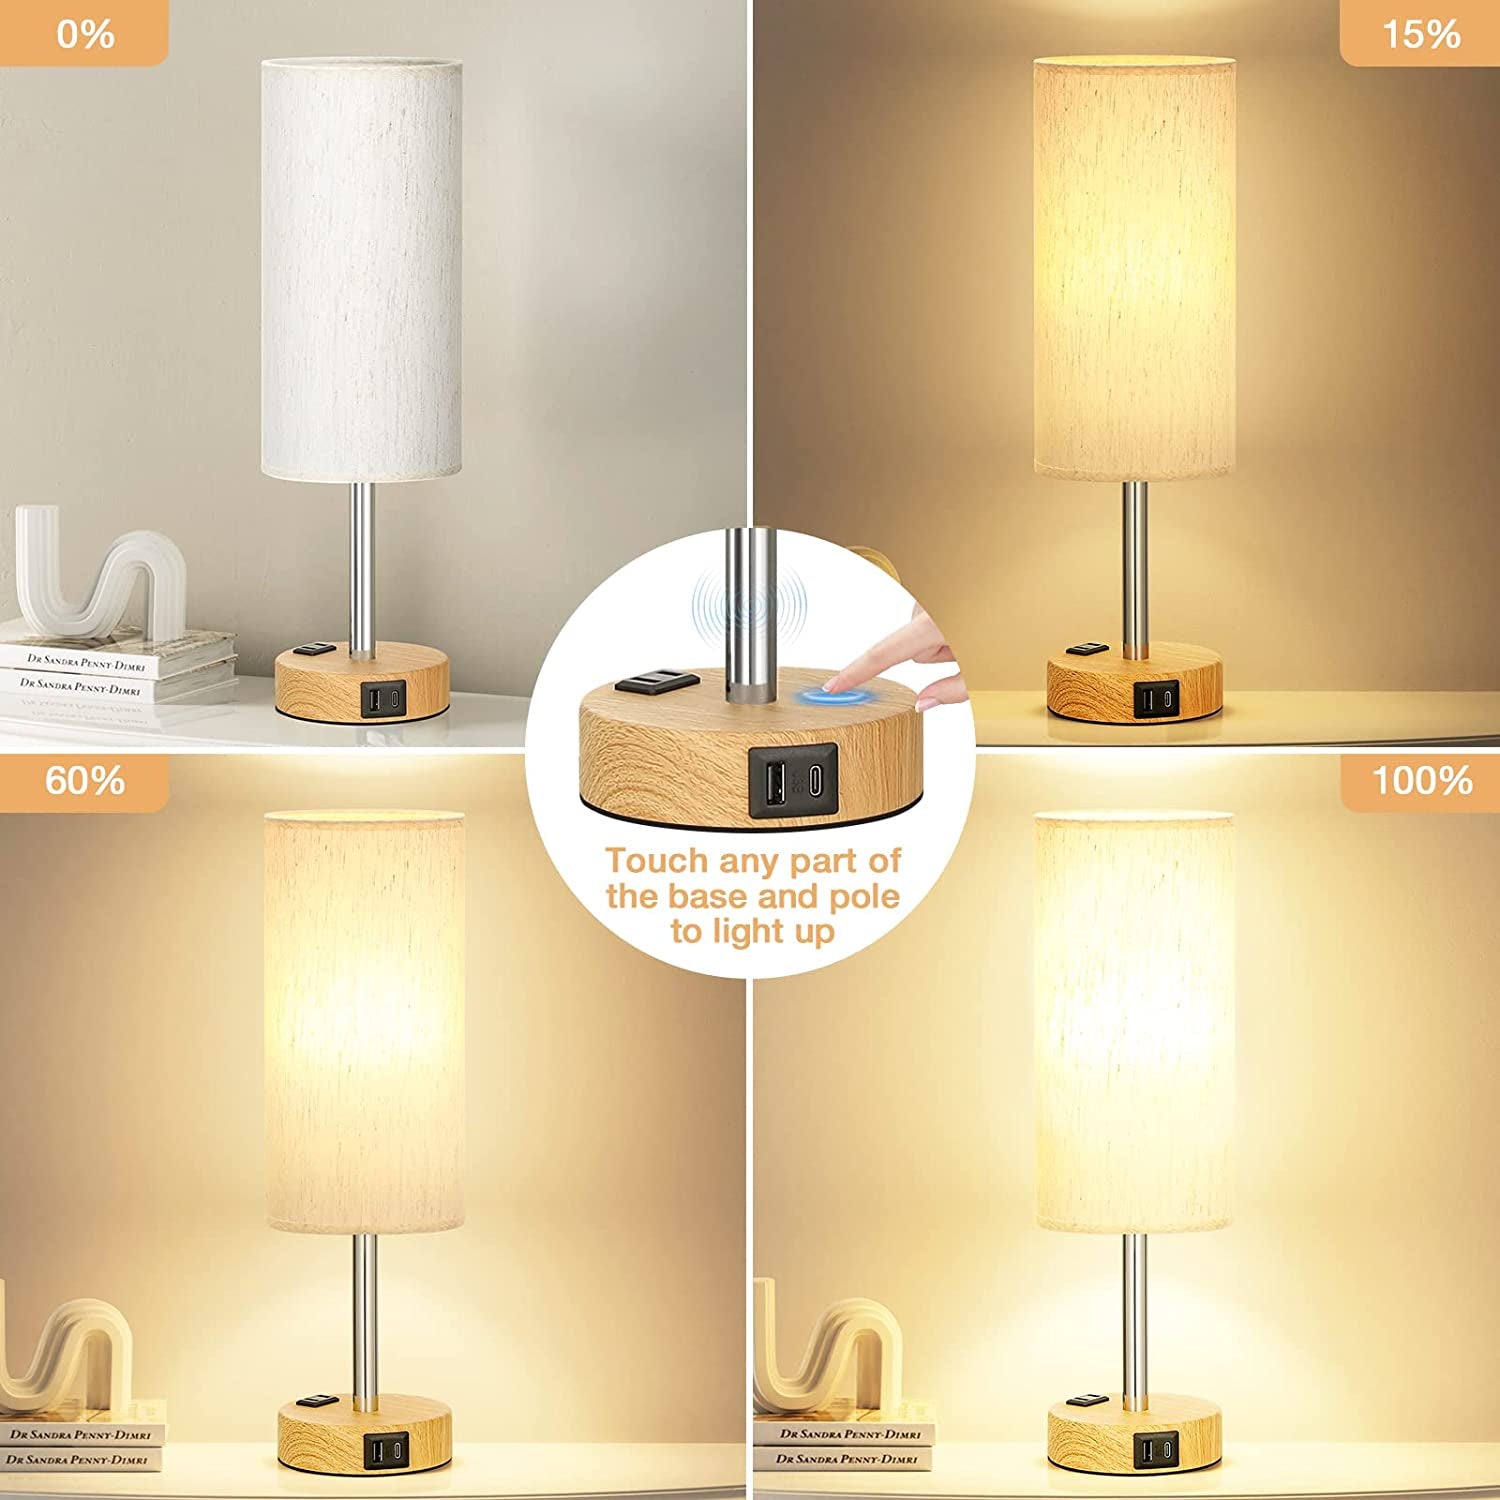 Beside Table Lamp for Bedroom Nightstand - 3 Way Dimmable Touch Lamp USB C Charging Ports and AC Outlet, Small Lamp Wood Base round Flaxen Fabric Shade for Living Room, Office Desk, LED Bulb Included